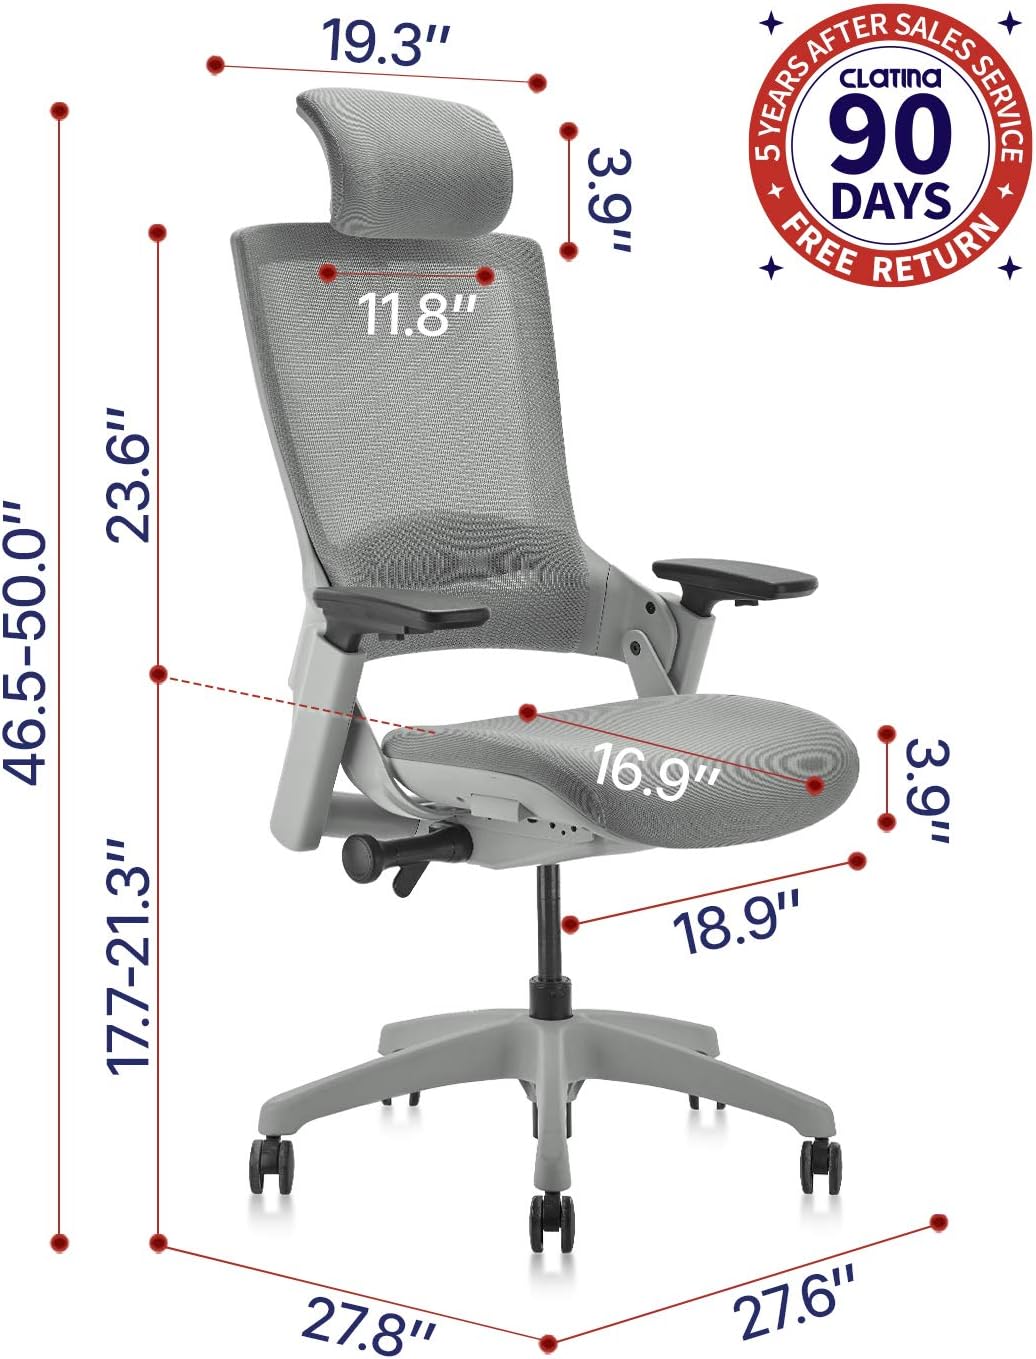 Dimensions of the Clatina Ergonomic Executive Chair